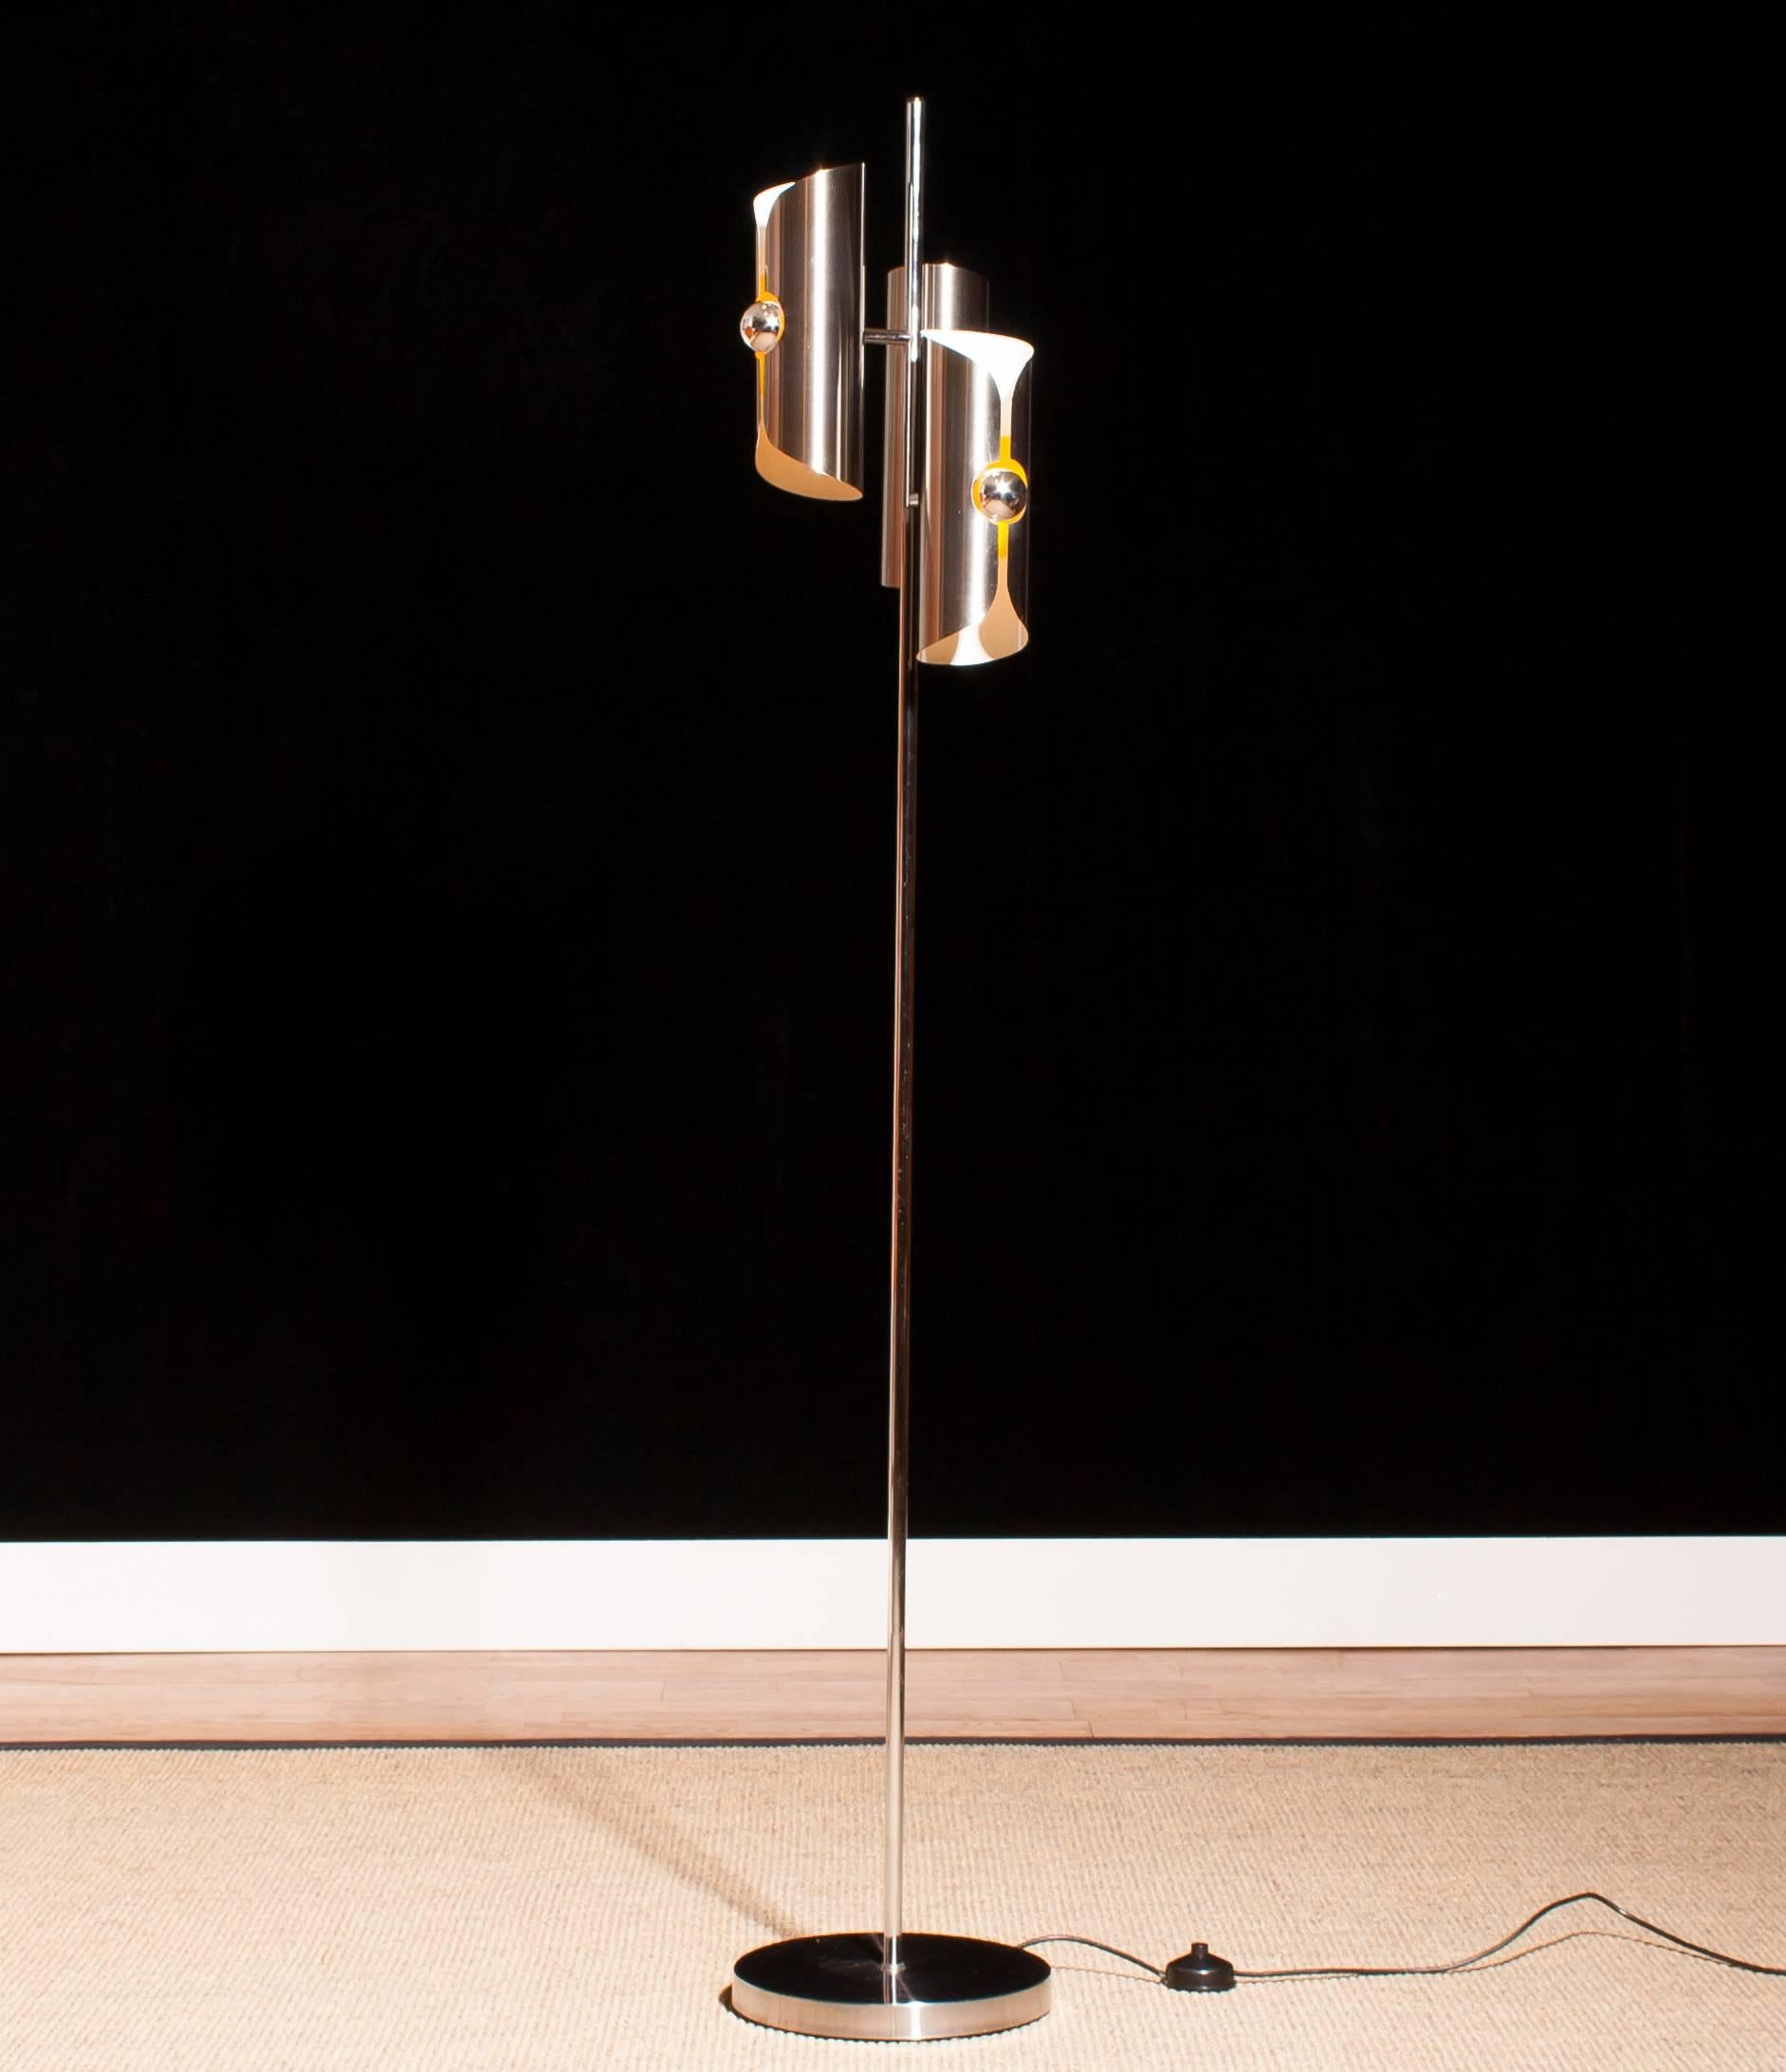 Stainless Steel 1970 Italian Floor Lamp in Chrome and Steel Combination